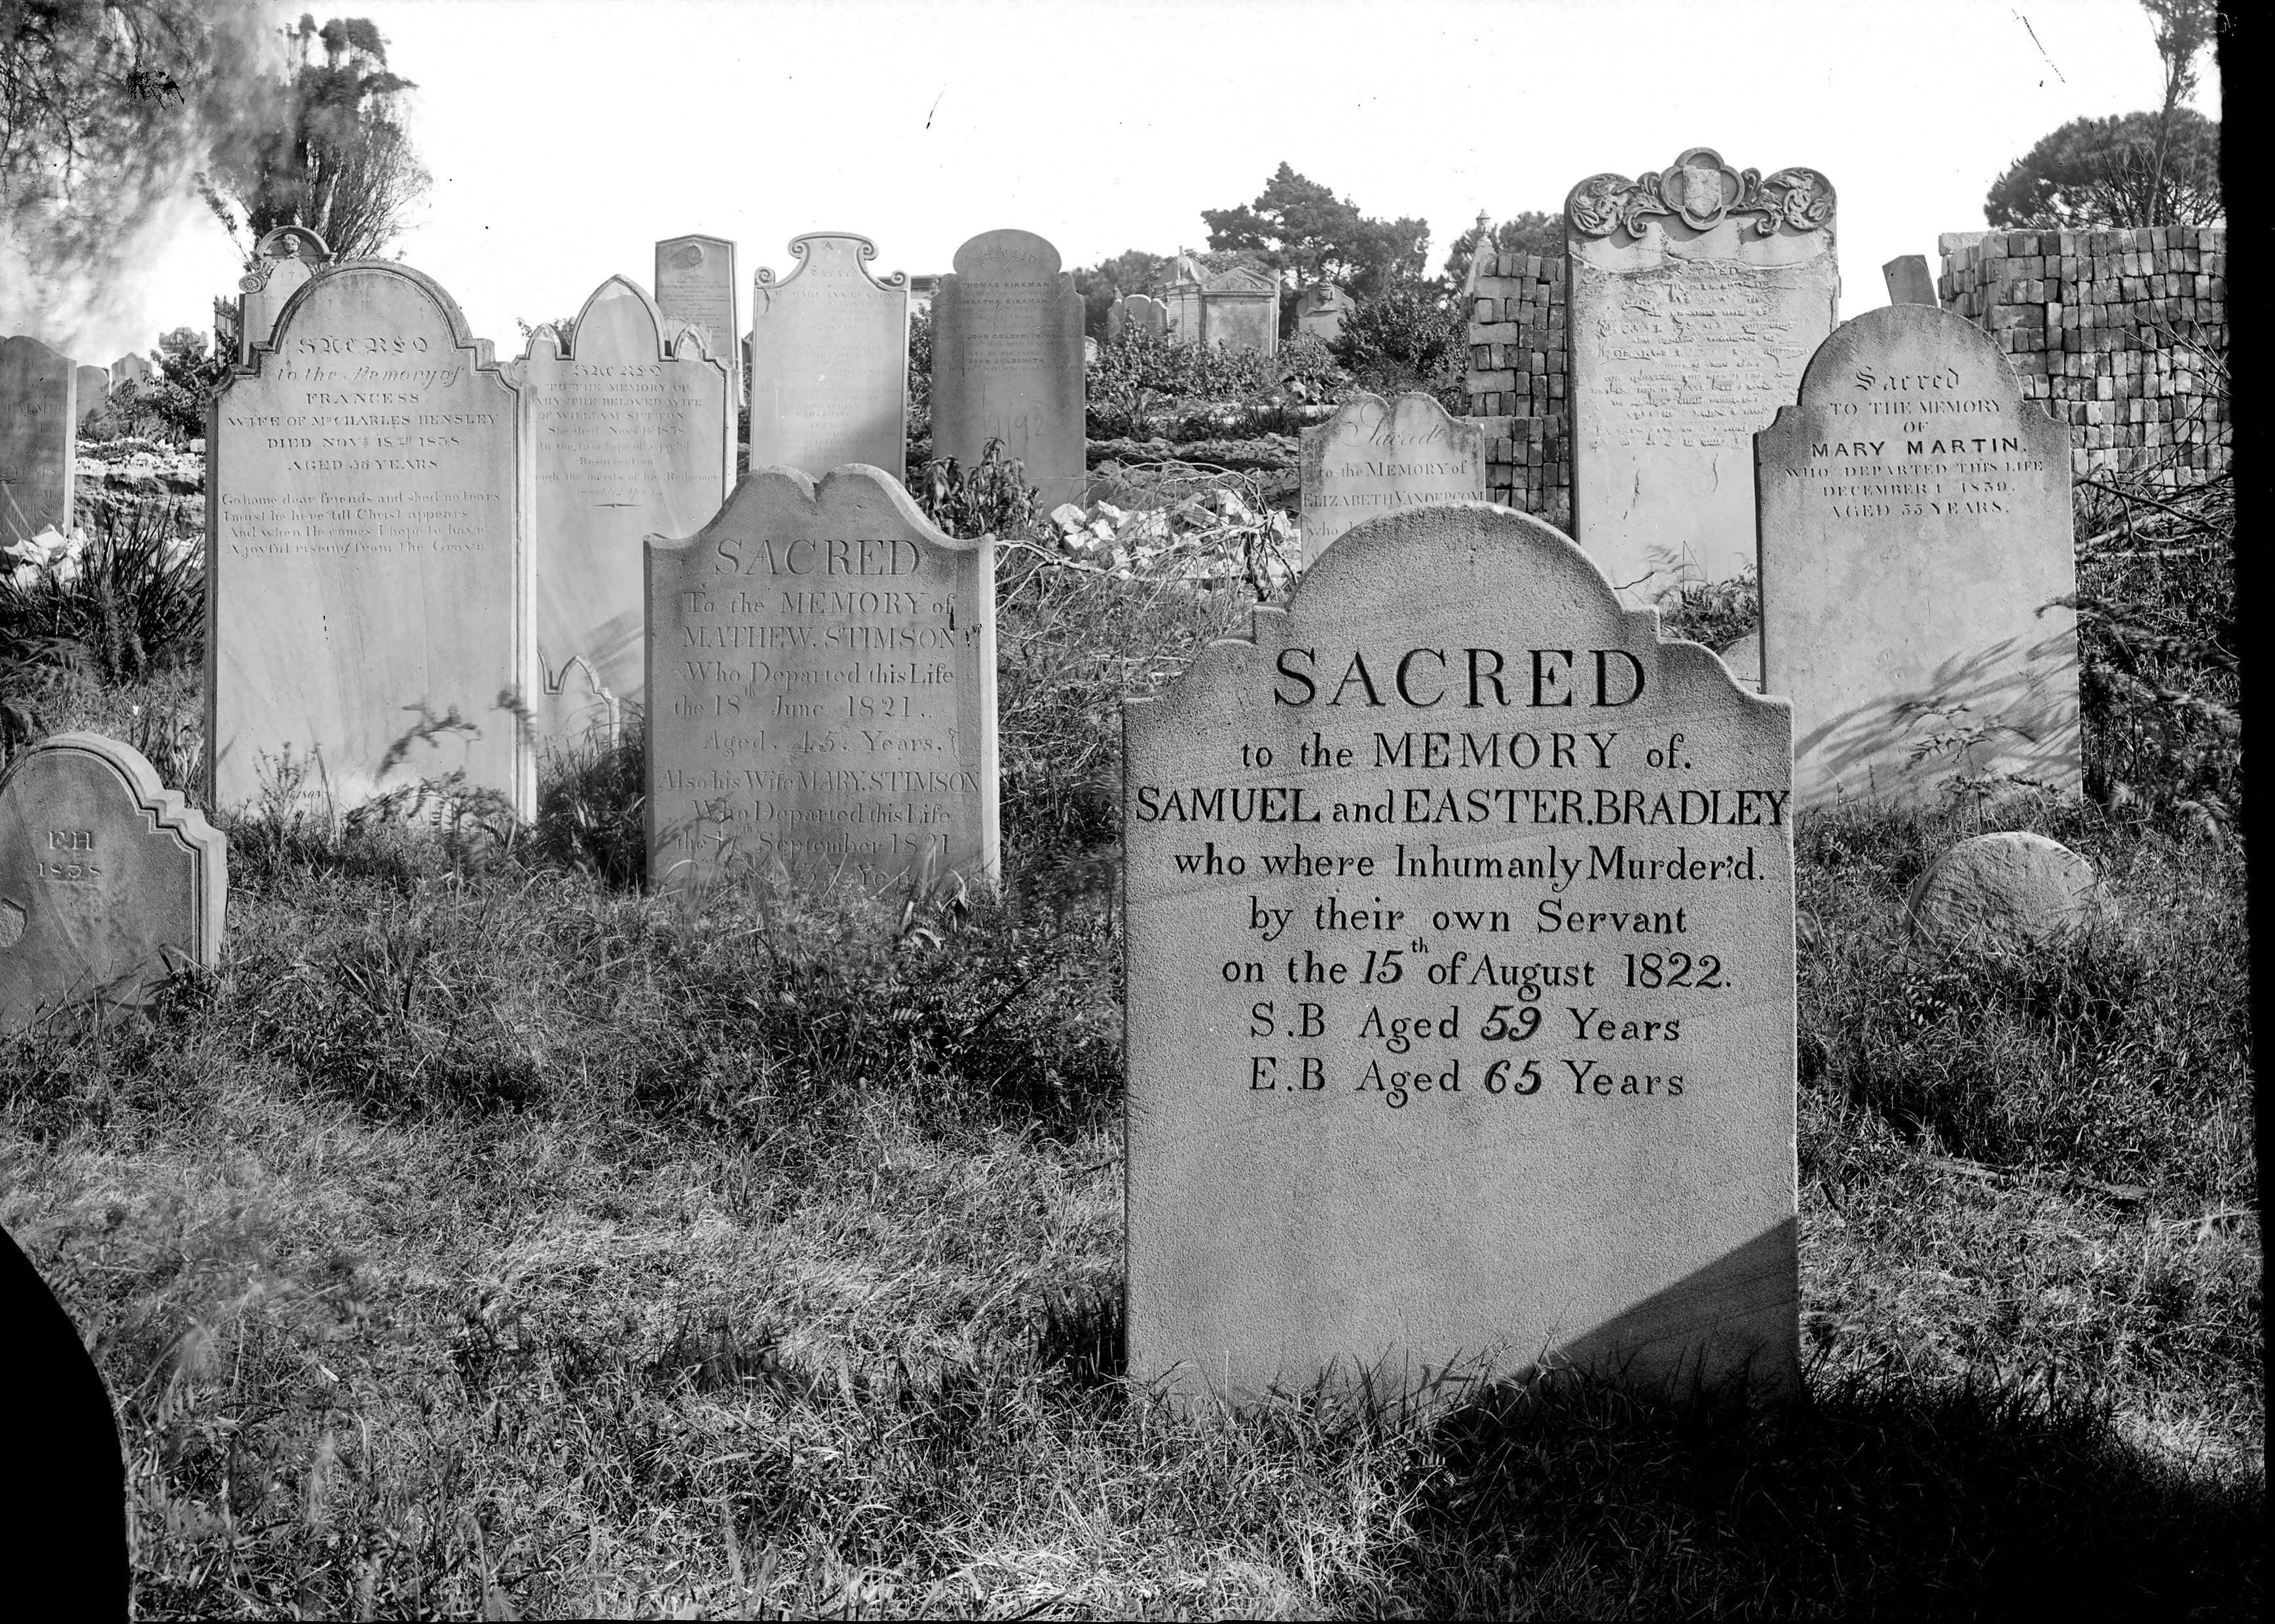 A black and white photograph of a graveyard. The headstone of Samuel and Easter Bradley in the foreground. 